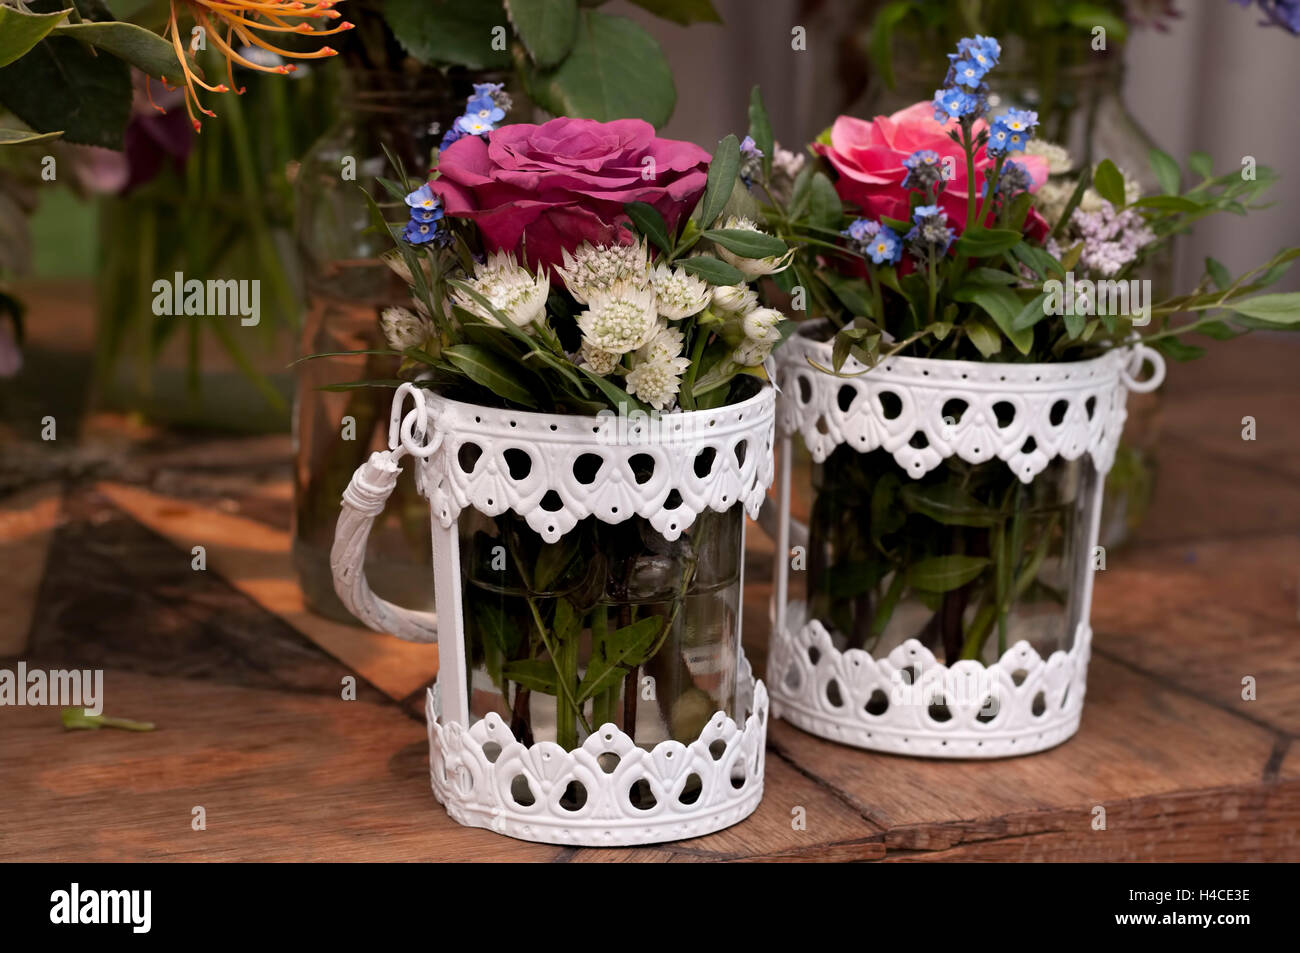 Two white vases of glass and metal with small flower bunches on a wooden board, in the background other cut flowers Stock Photo